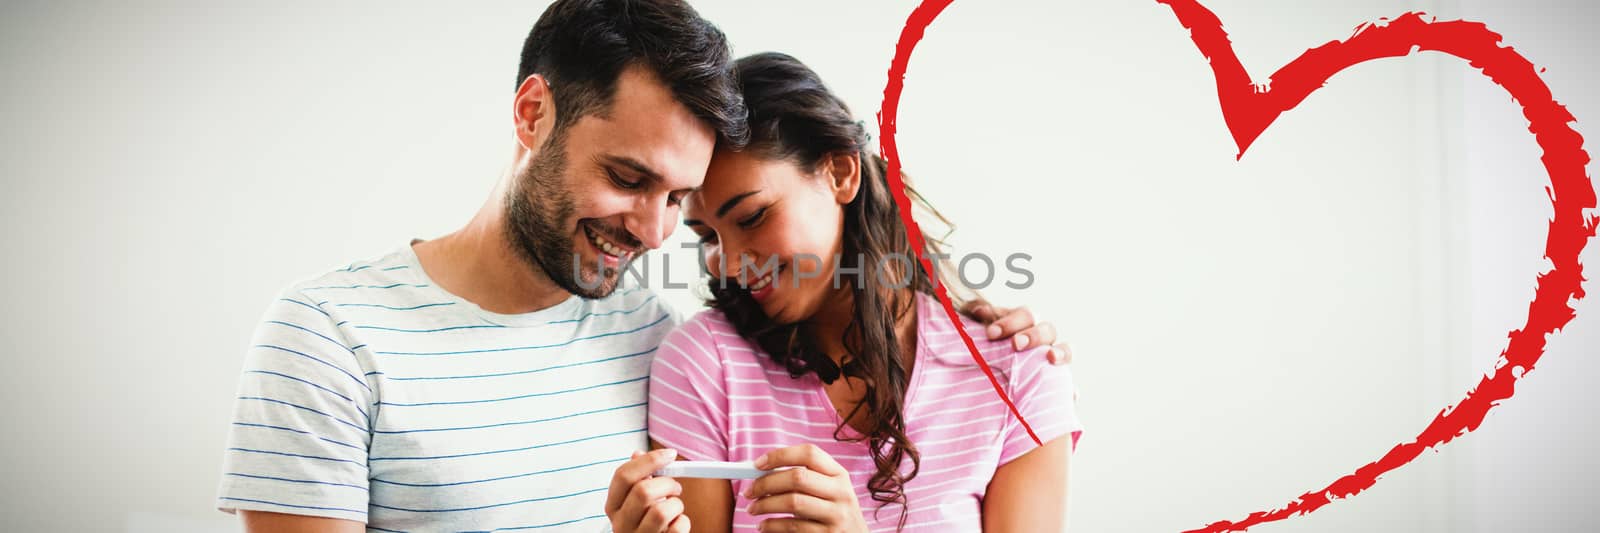 Heart against joyful couple finding out results of a pregnancy test in the bedroom